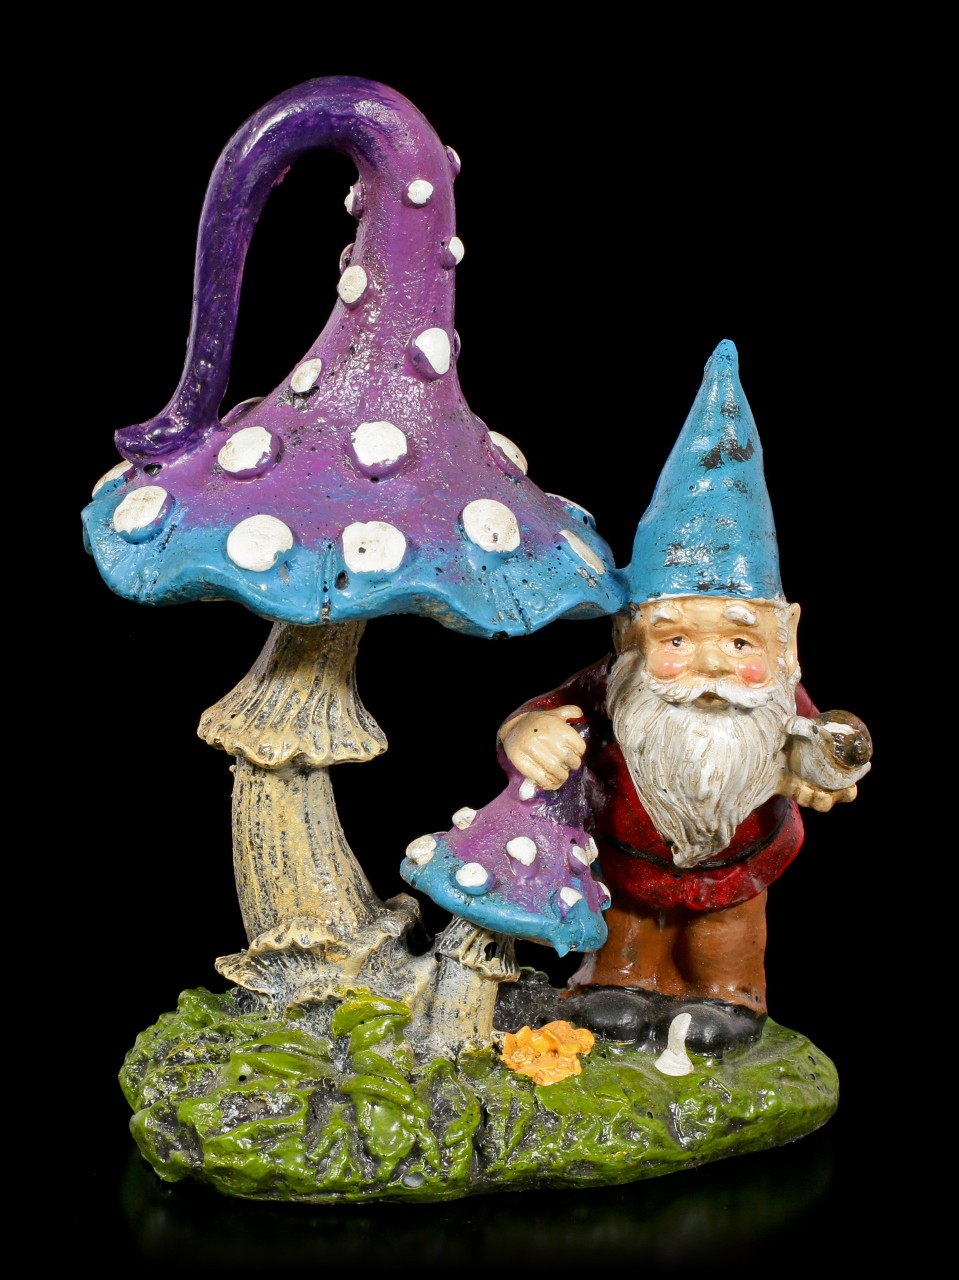 Garden Gnome Figurine with Mushroom and Snail